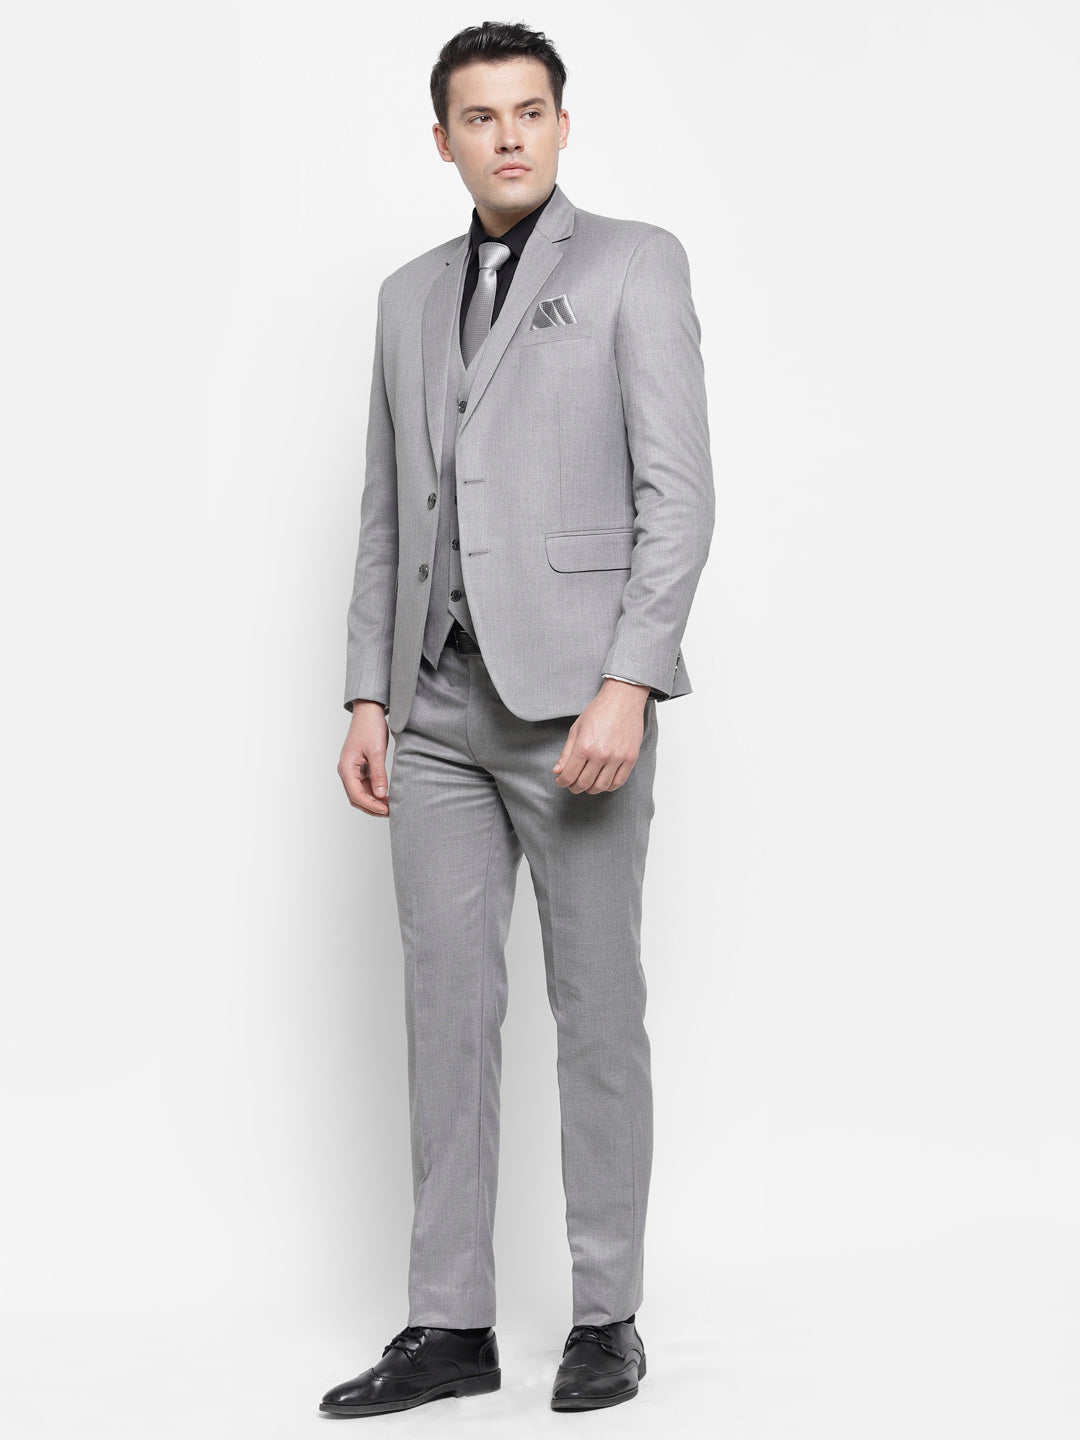 Aggregate more than 181 raymond suit pant